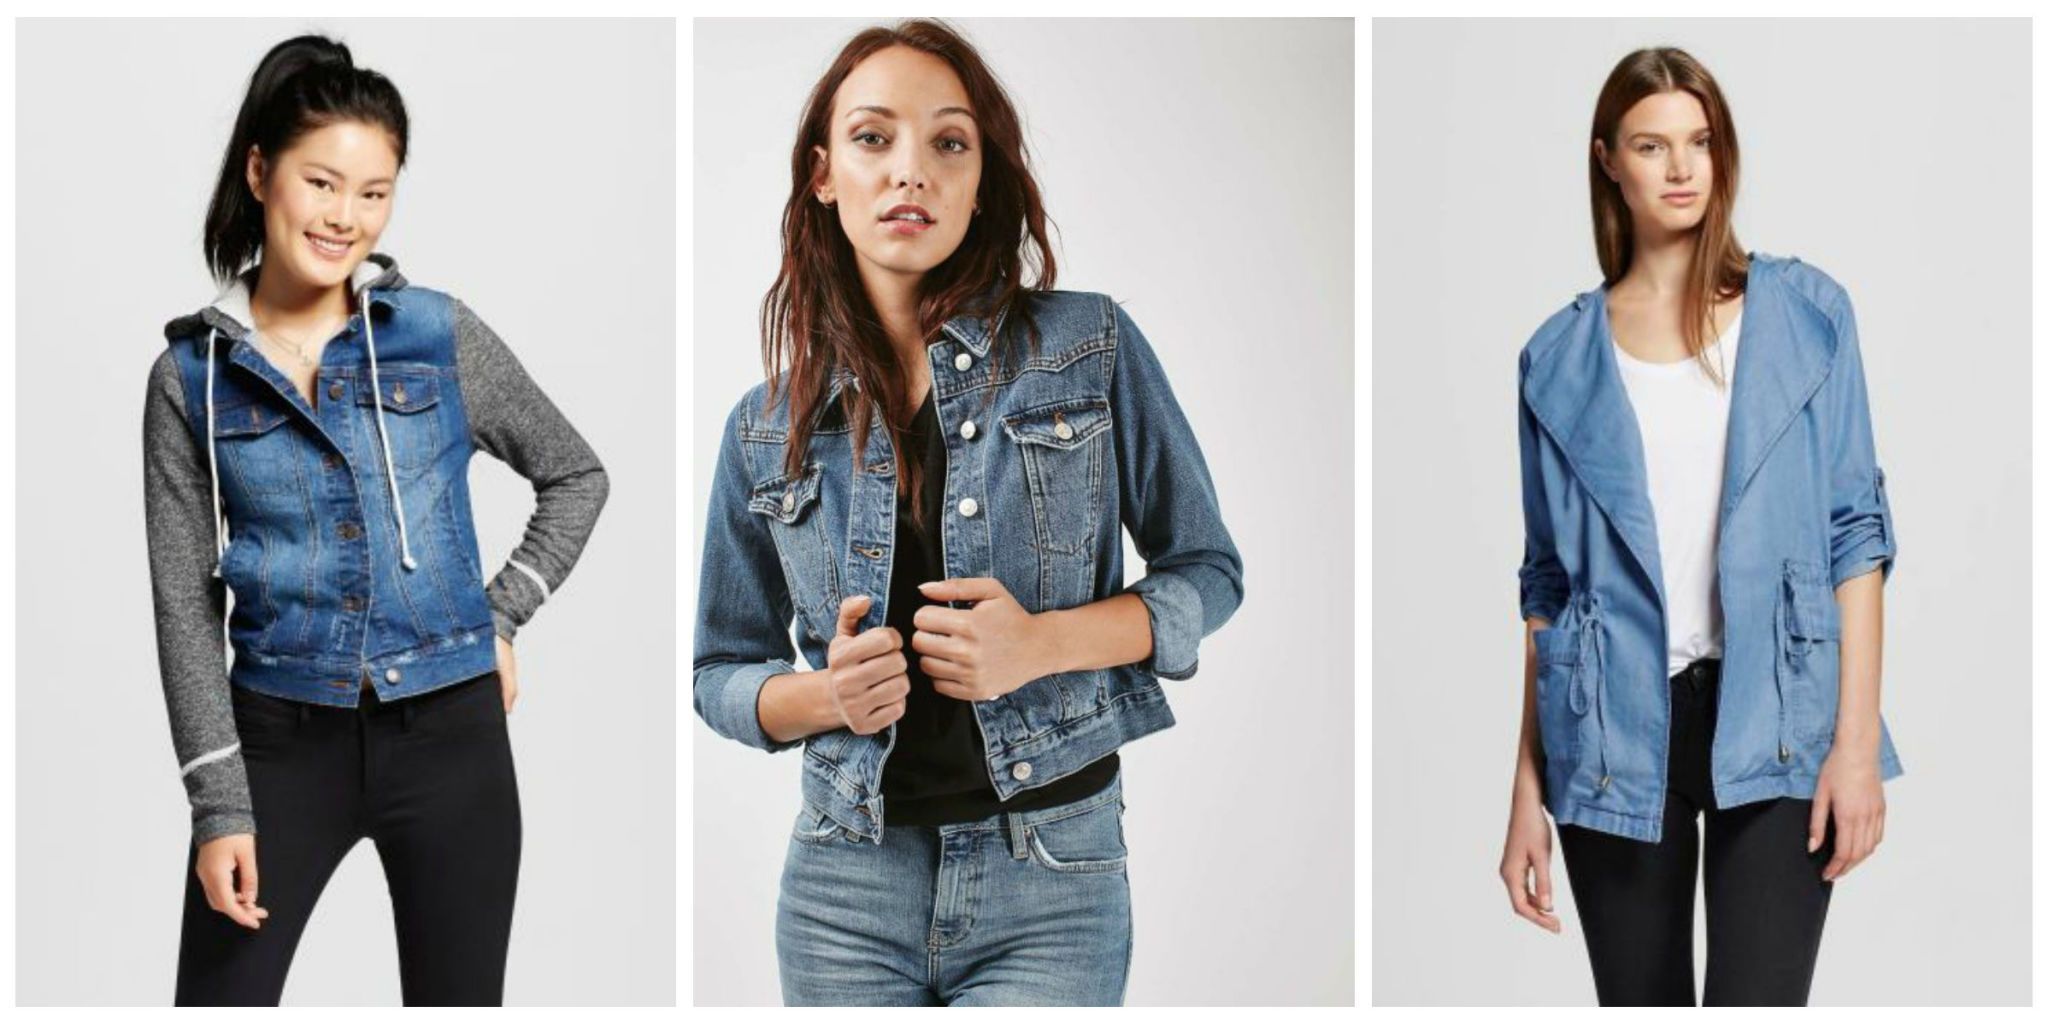 Best Jean Jackets For Women: Top 5 Styles Most Recommended By Fashion  Experts - Study Finds